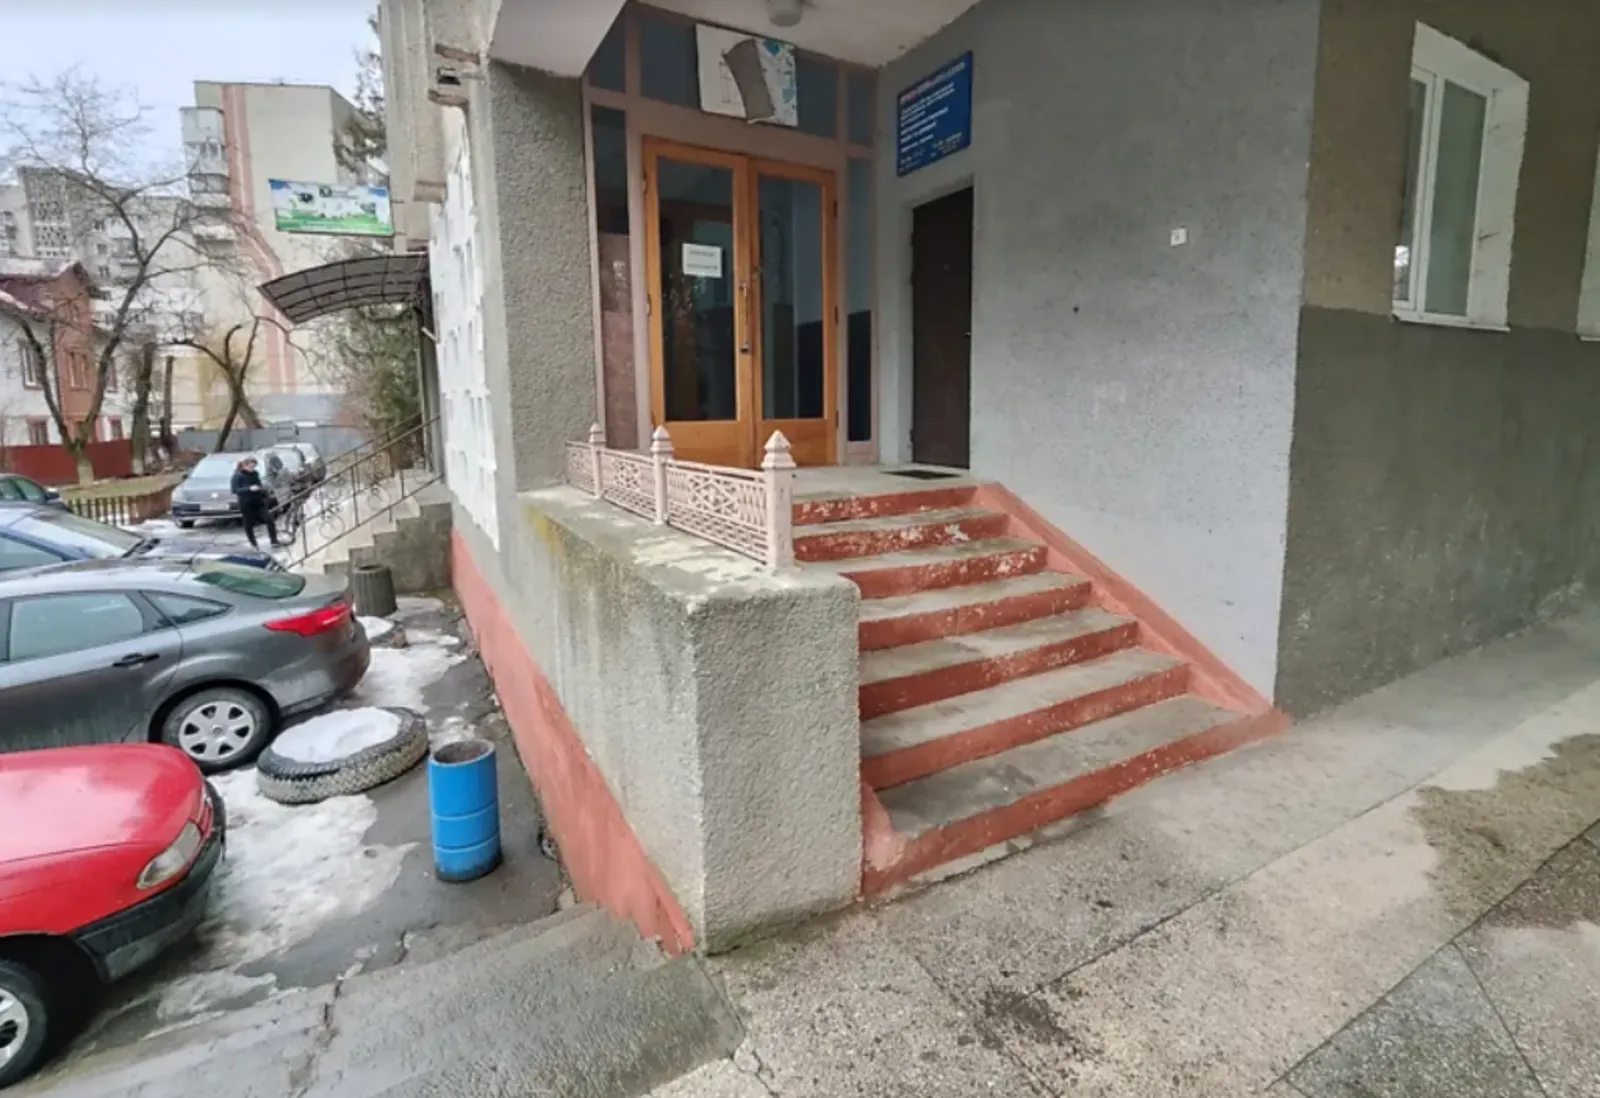 Real estate for sale for commercial purposes. 280 m², 2nd floor/2 floors. Medova vul., Ternopil. 